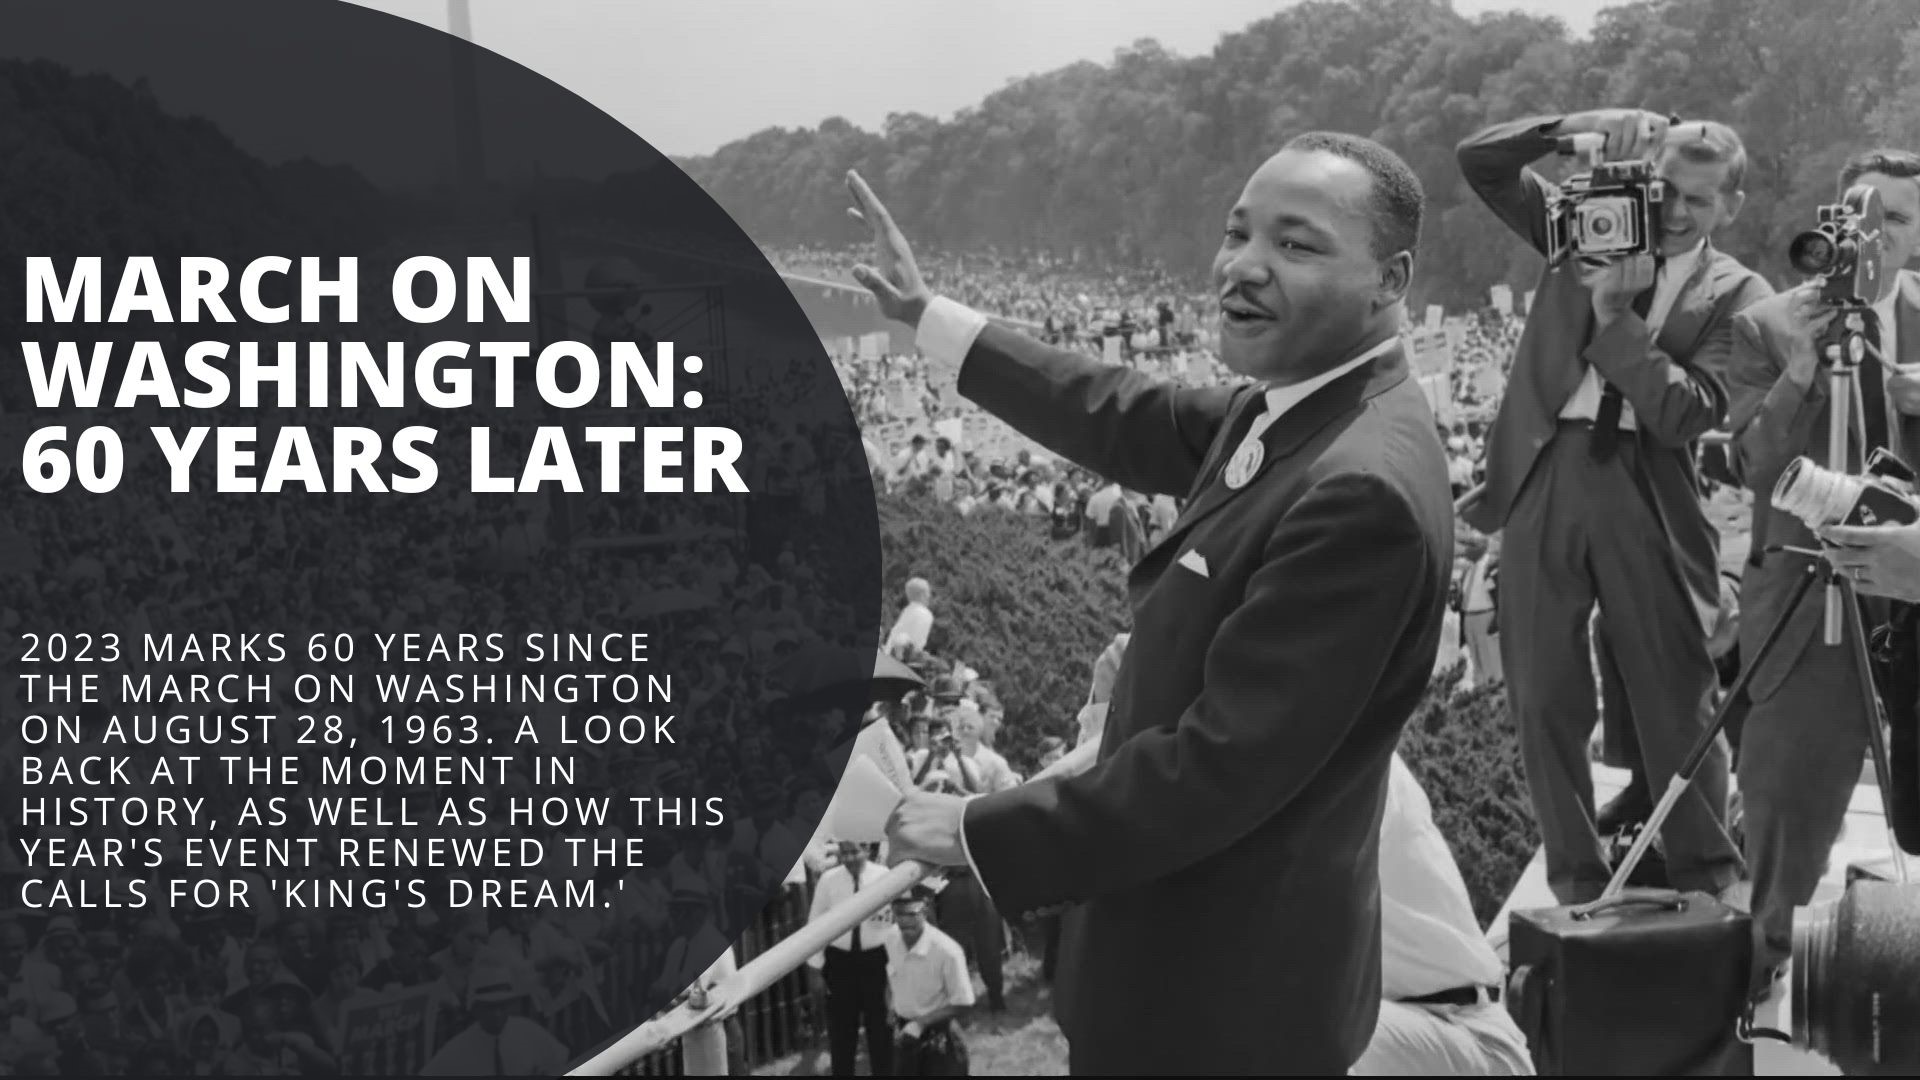 It's been 60 years since the March on Washington led by civil rights leader, Martin Luther King, Jr.